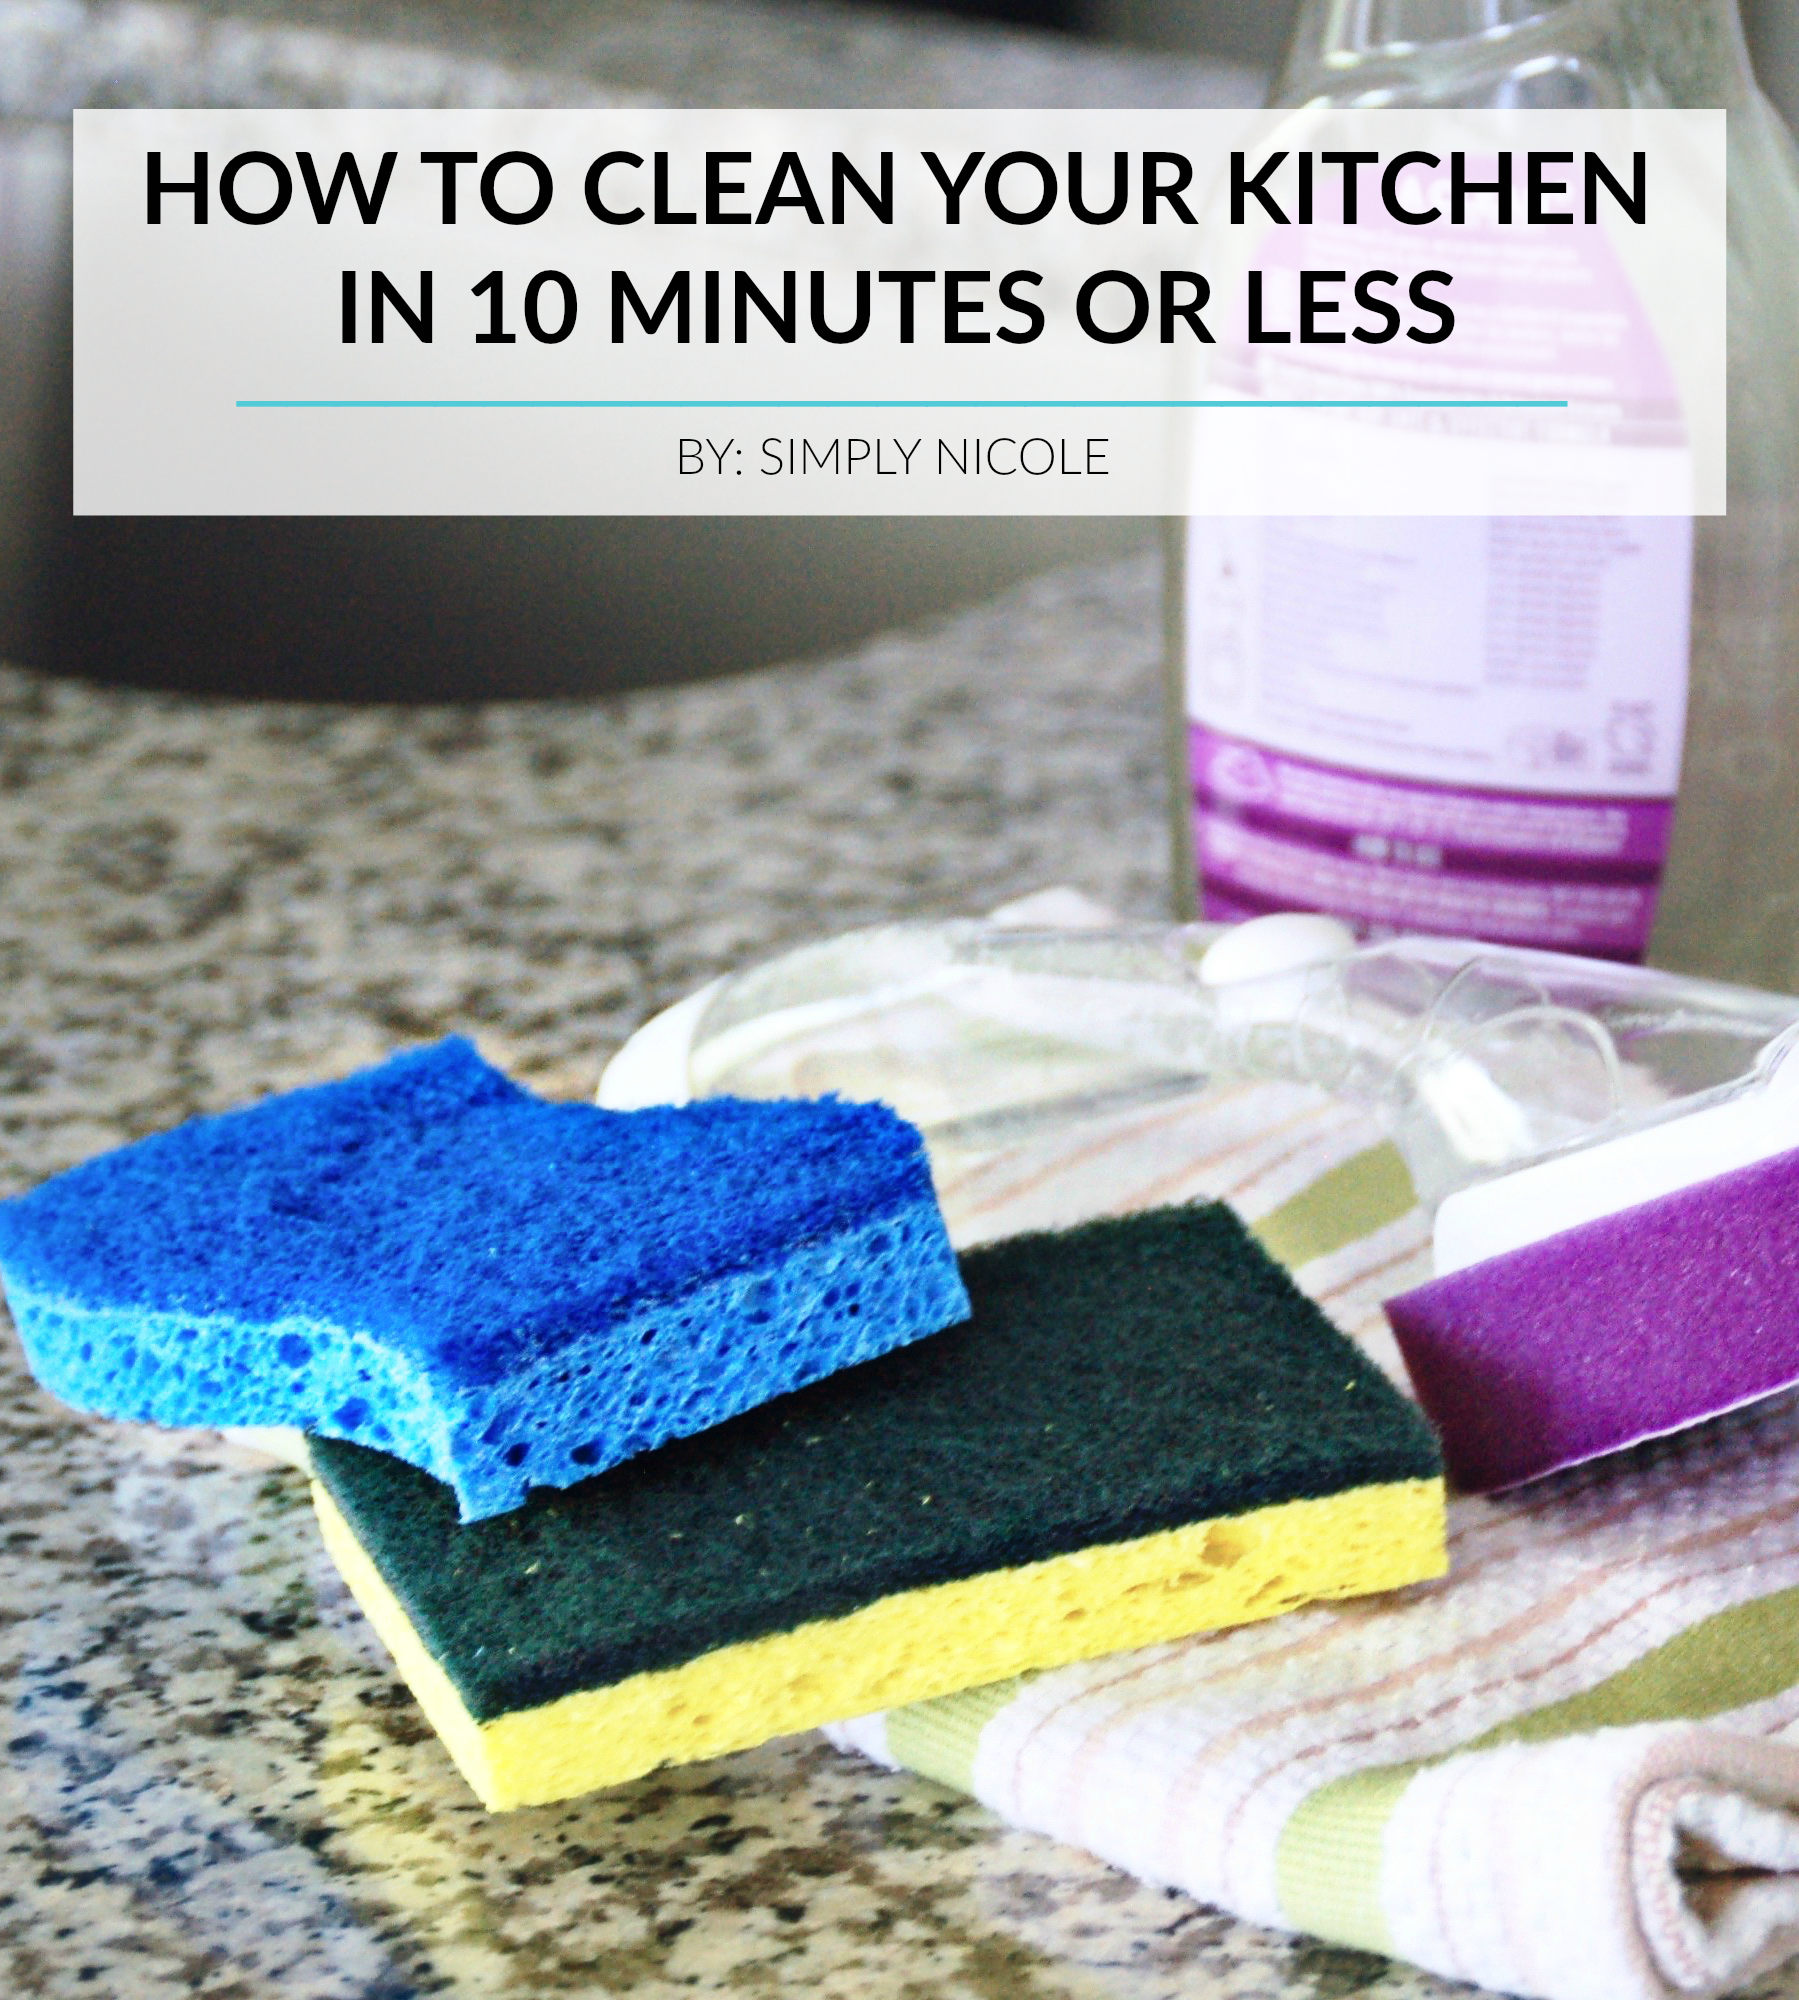 clean kitchen in 10 minutes or less